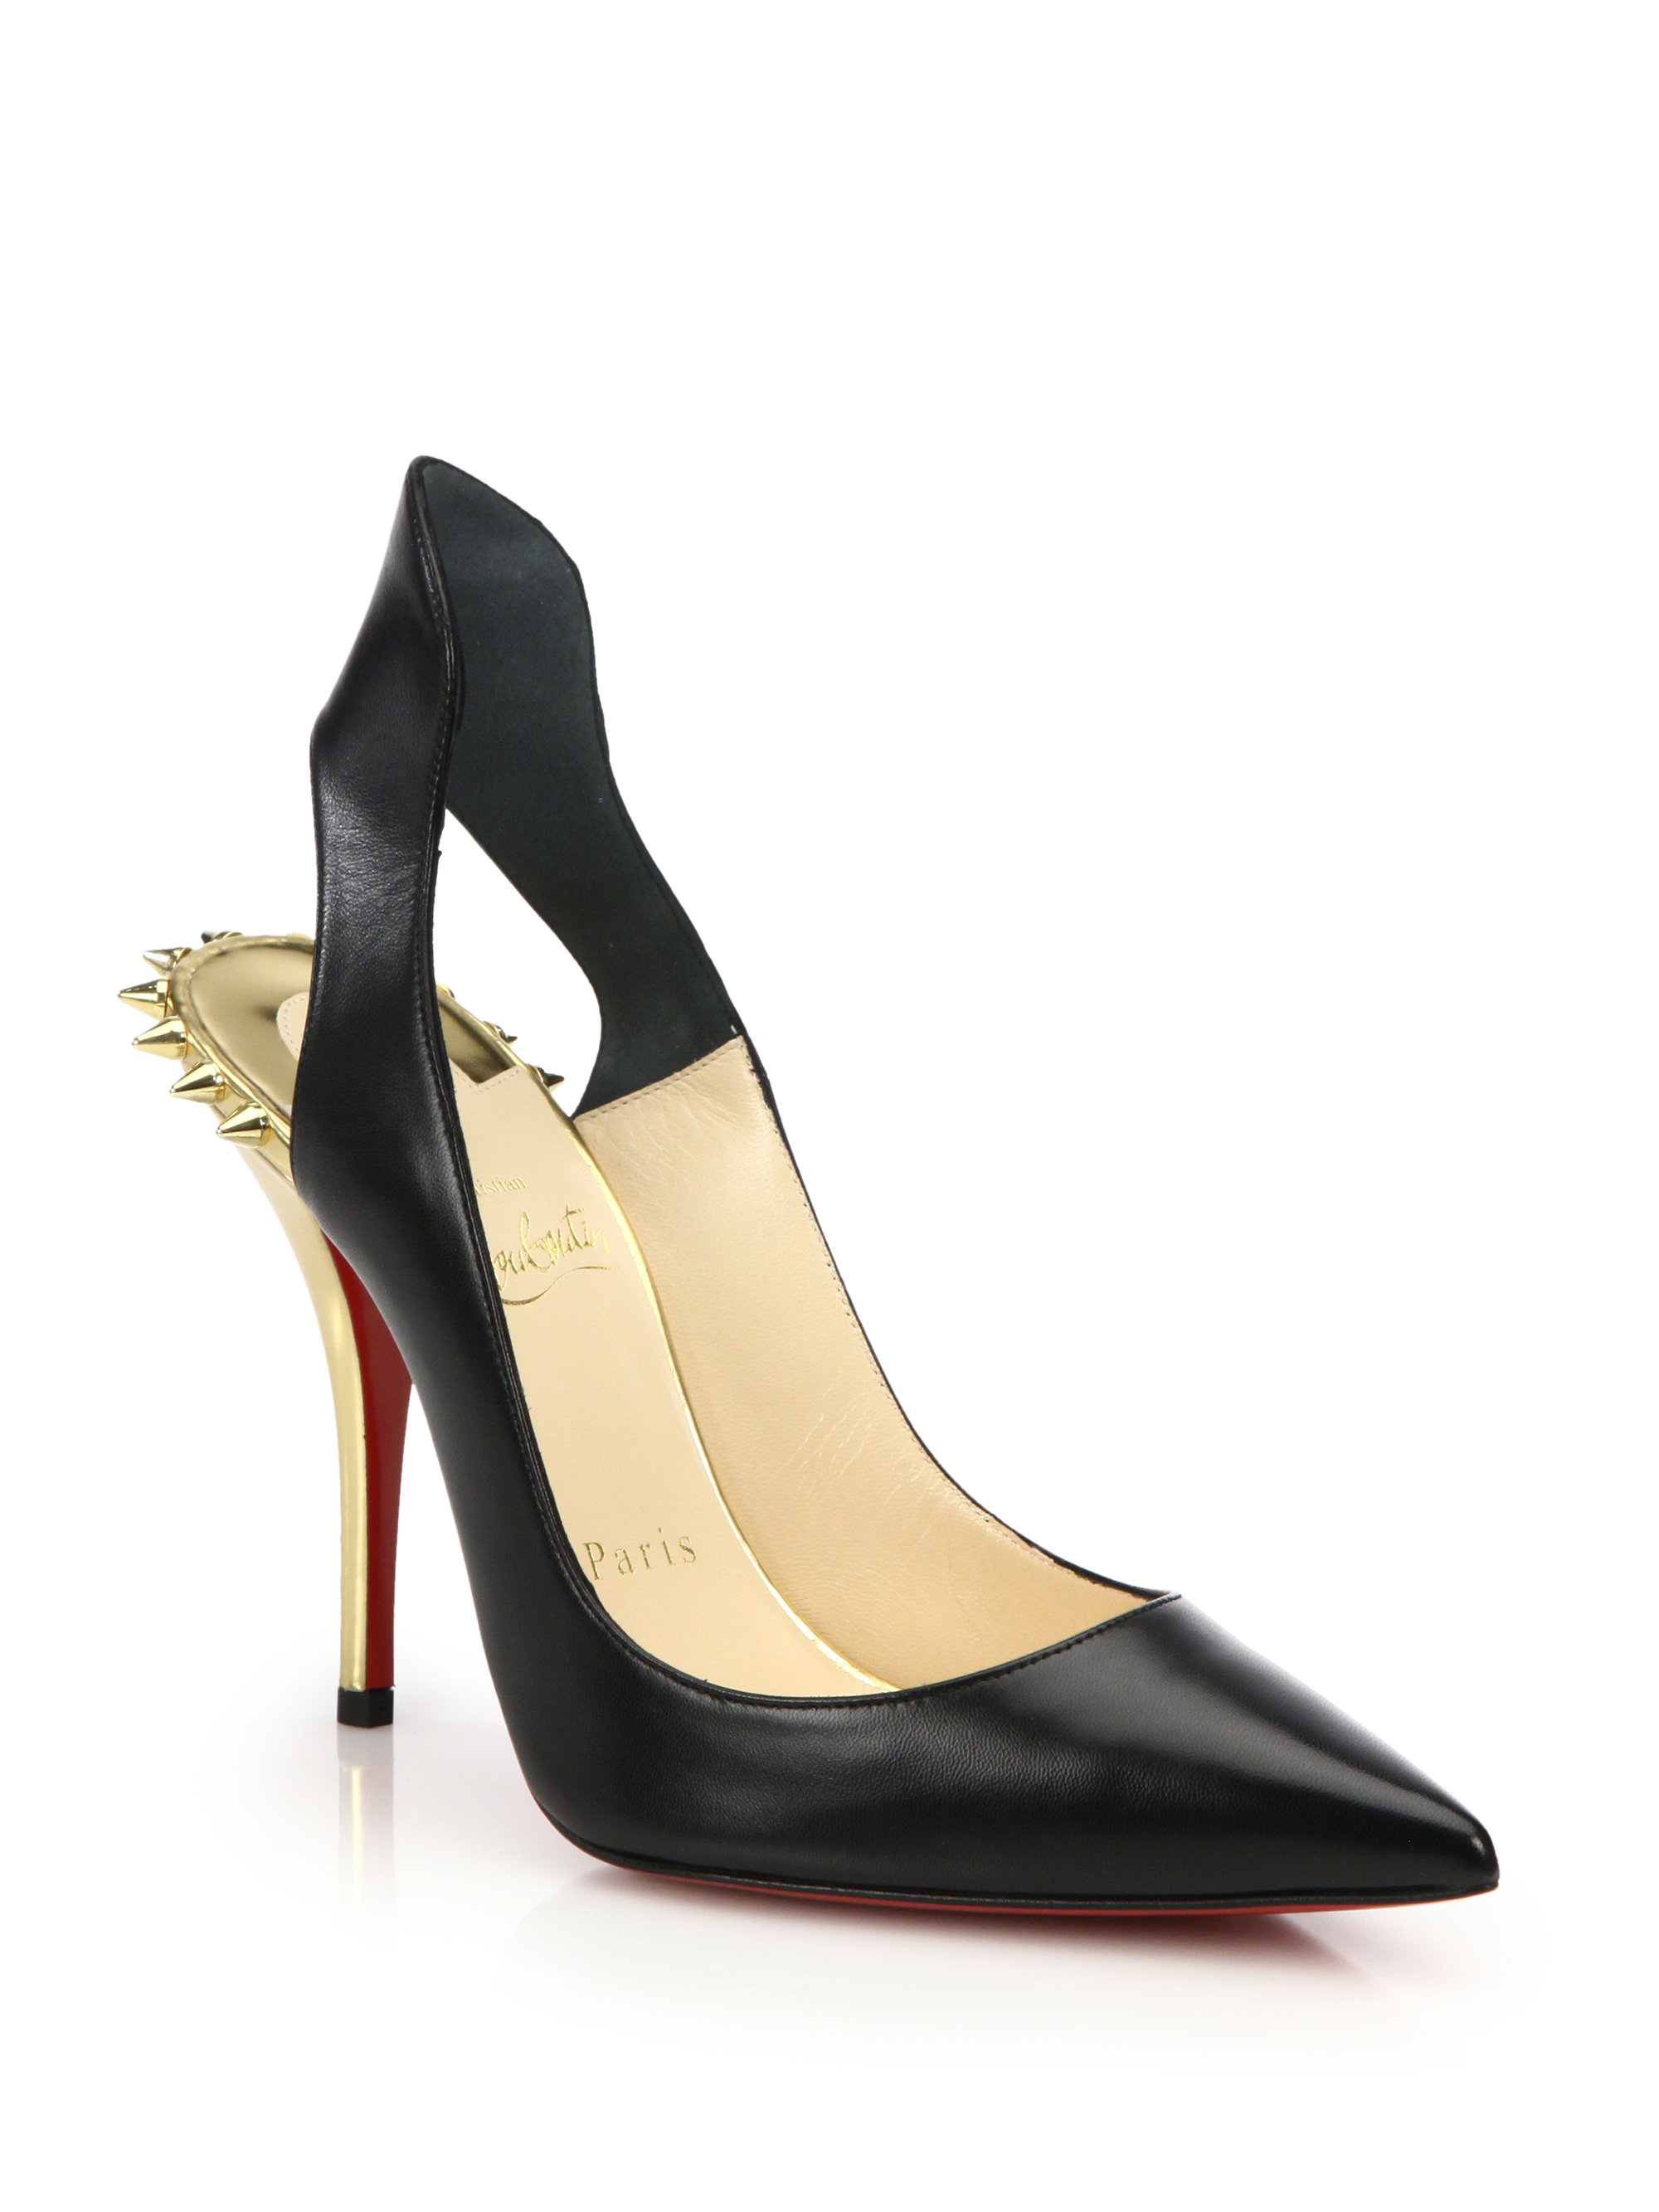 Christian louboutin Survivita Spiked Leather Slingback Pumps in ...